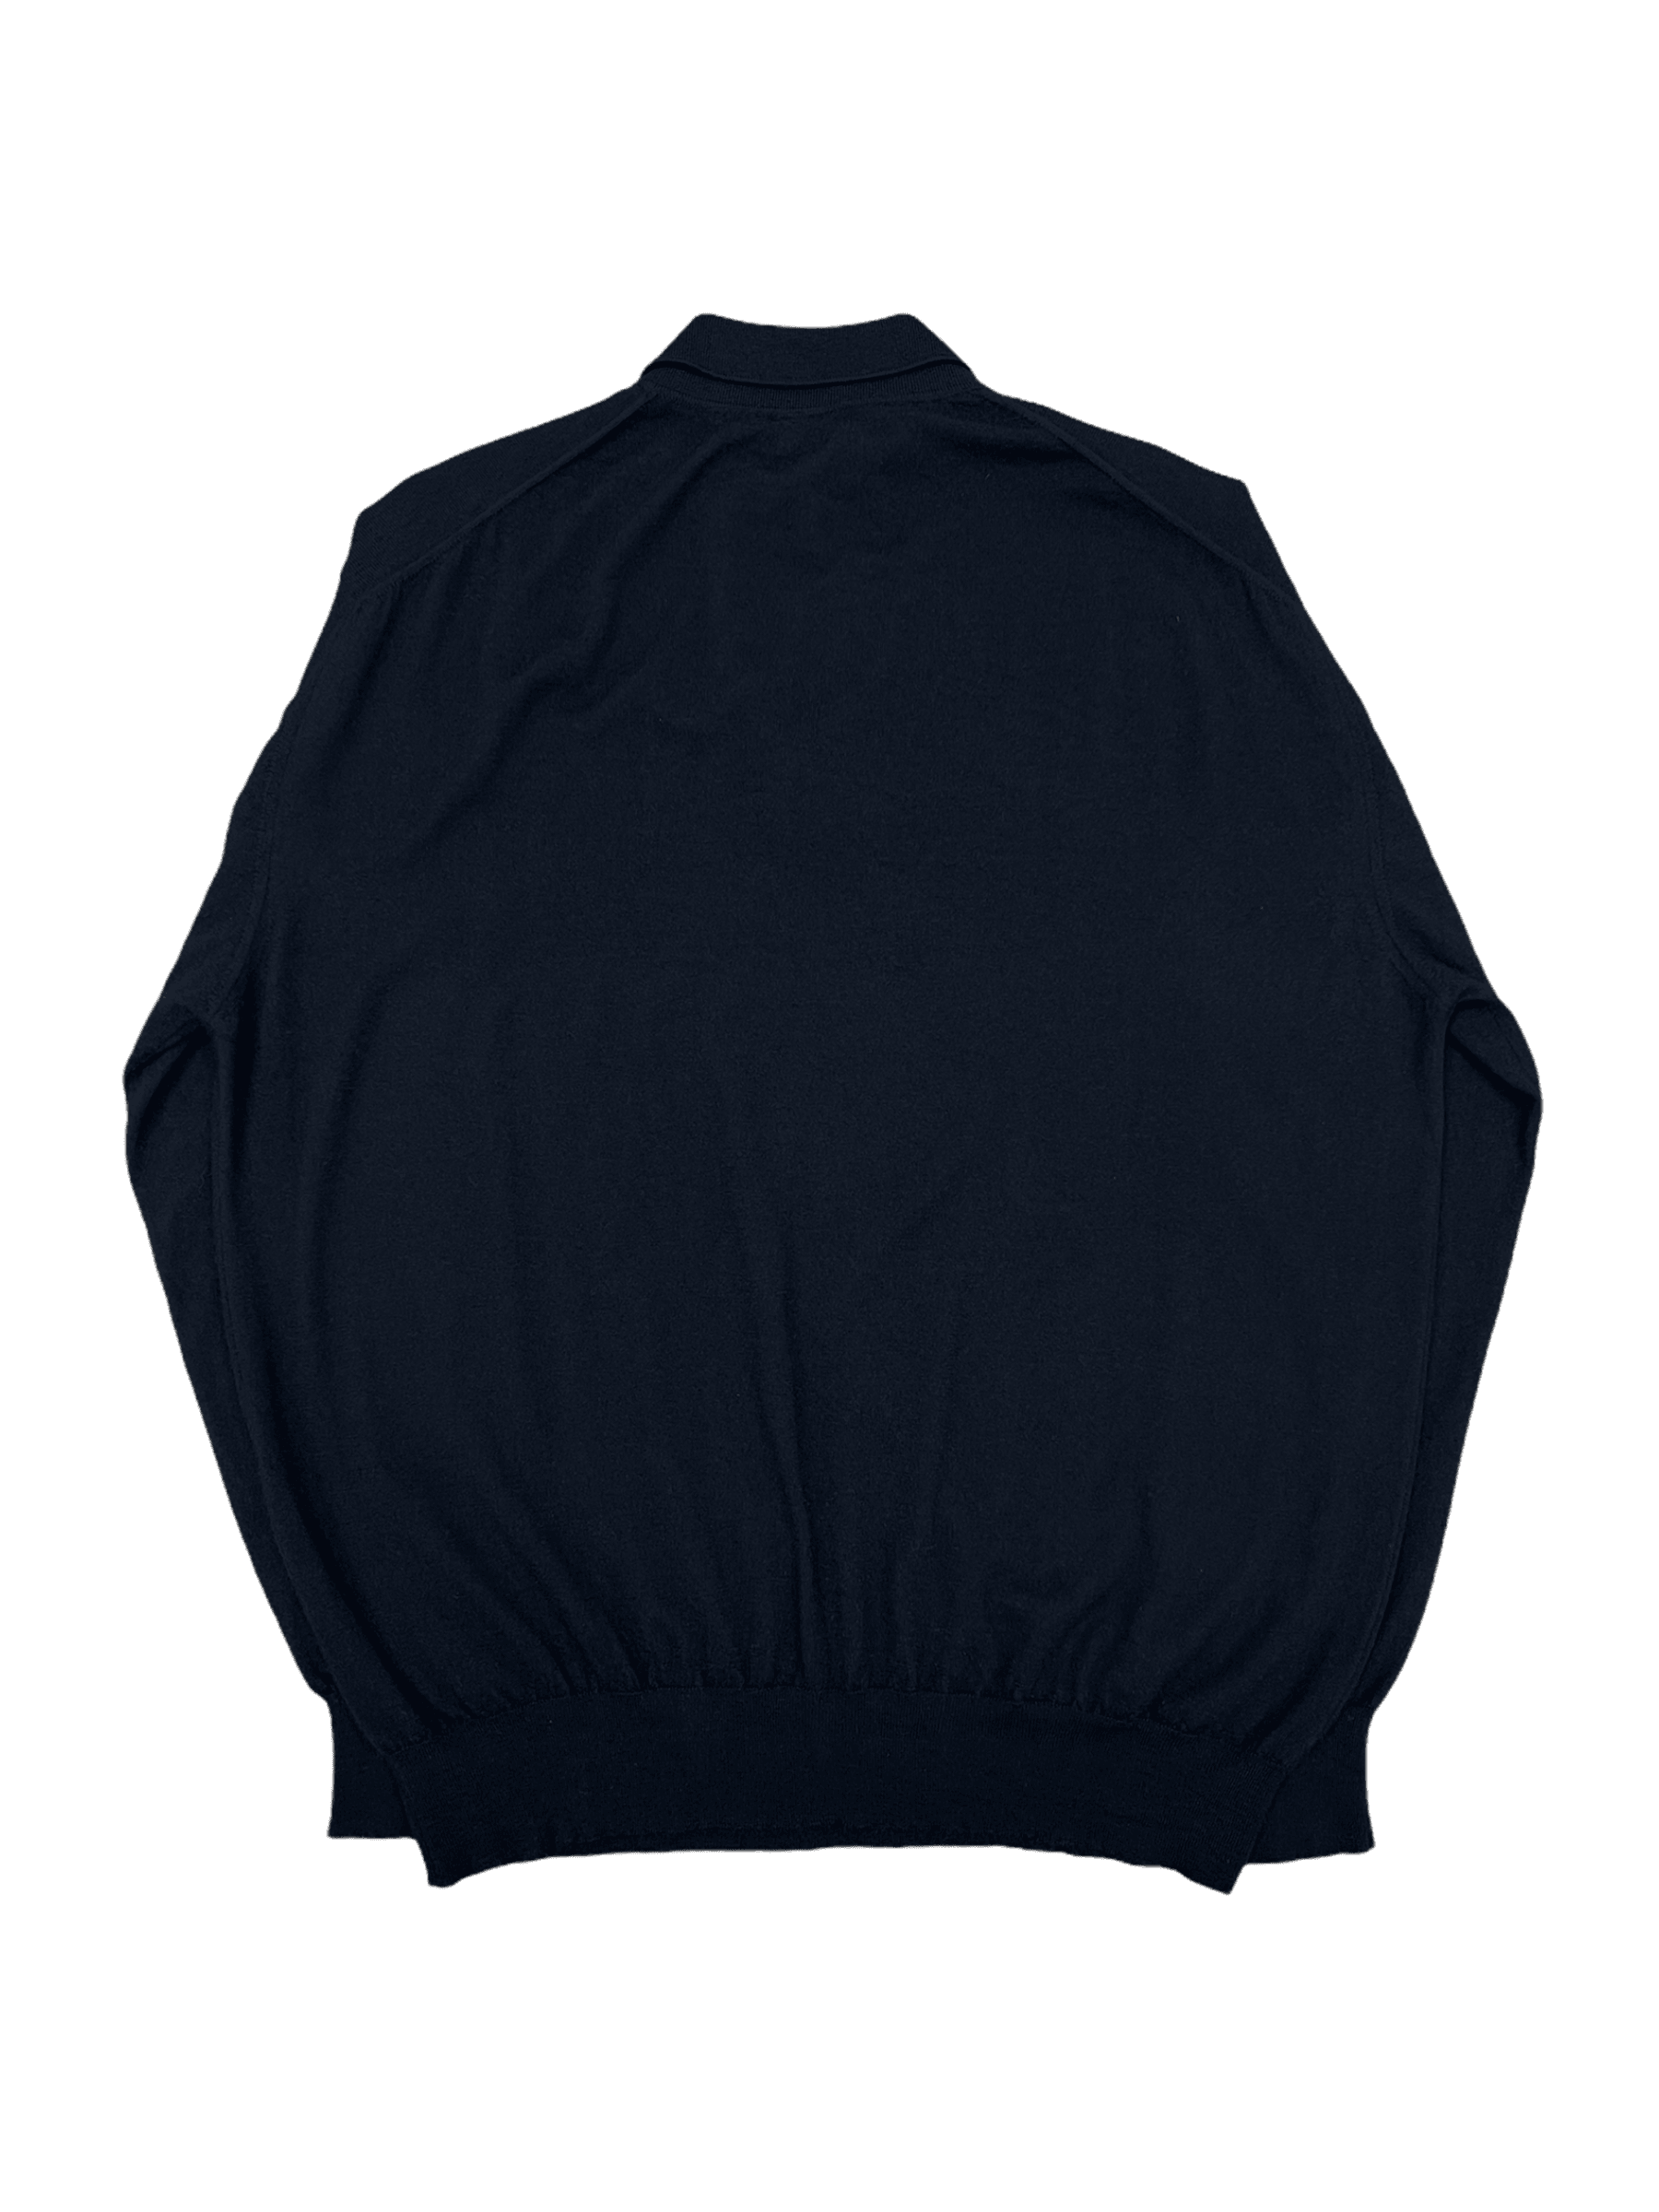 Brioni Black Cashmere Long Sleeve Polo Sweater—Genuine Design luxury consignment